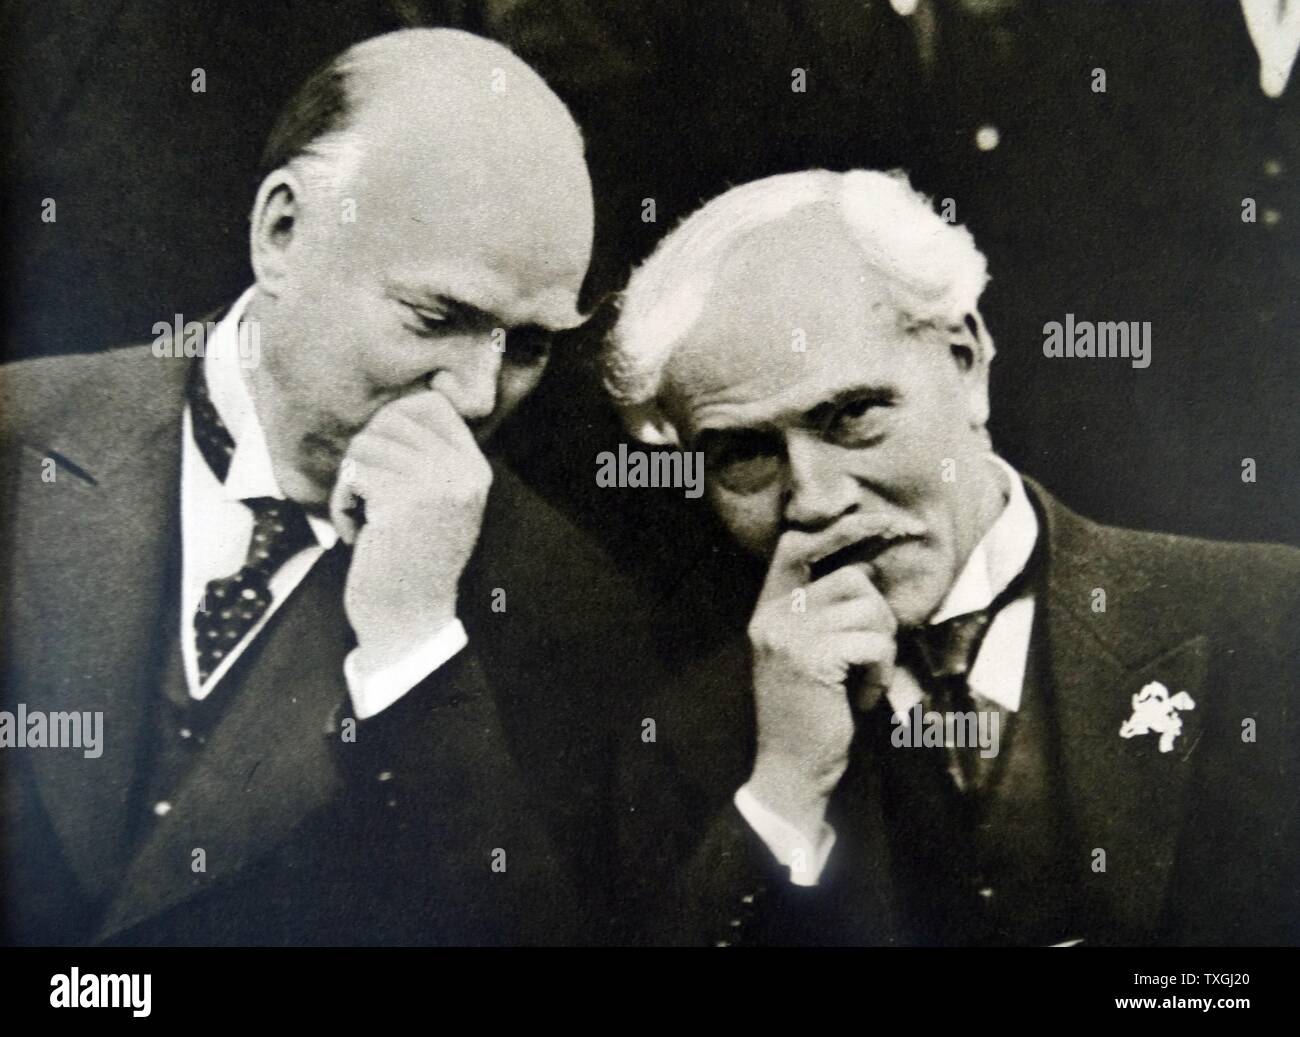 Photographic print of former Prime Minister of Canada, R. B. Bennett (1870-1947) talking to former Prime Minister of Britain, Ramsay MacDonald (1866-1937). Dated 20th Century Stock Photo